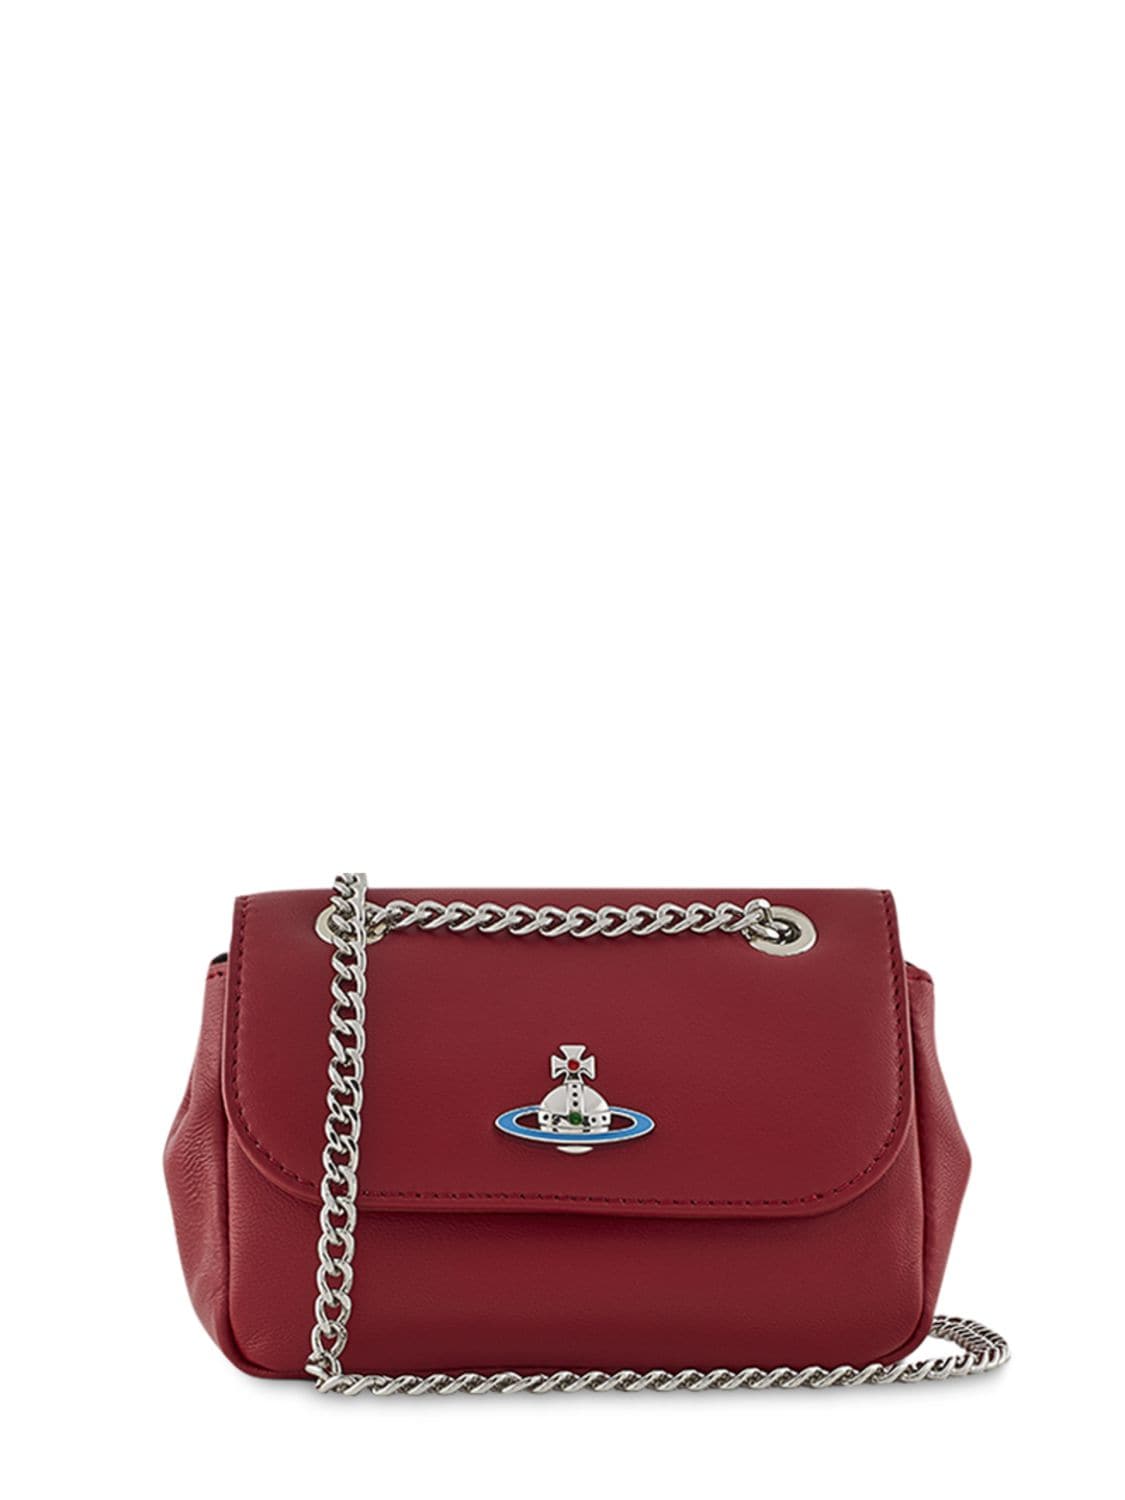 Vivienne Westwood Small Nappa Leather Shoulder Bag In Red